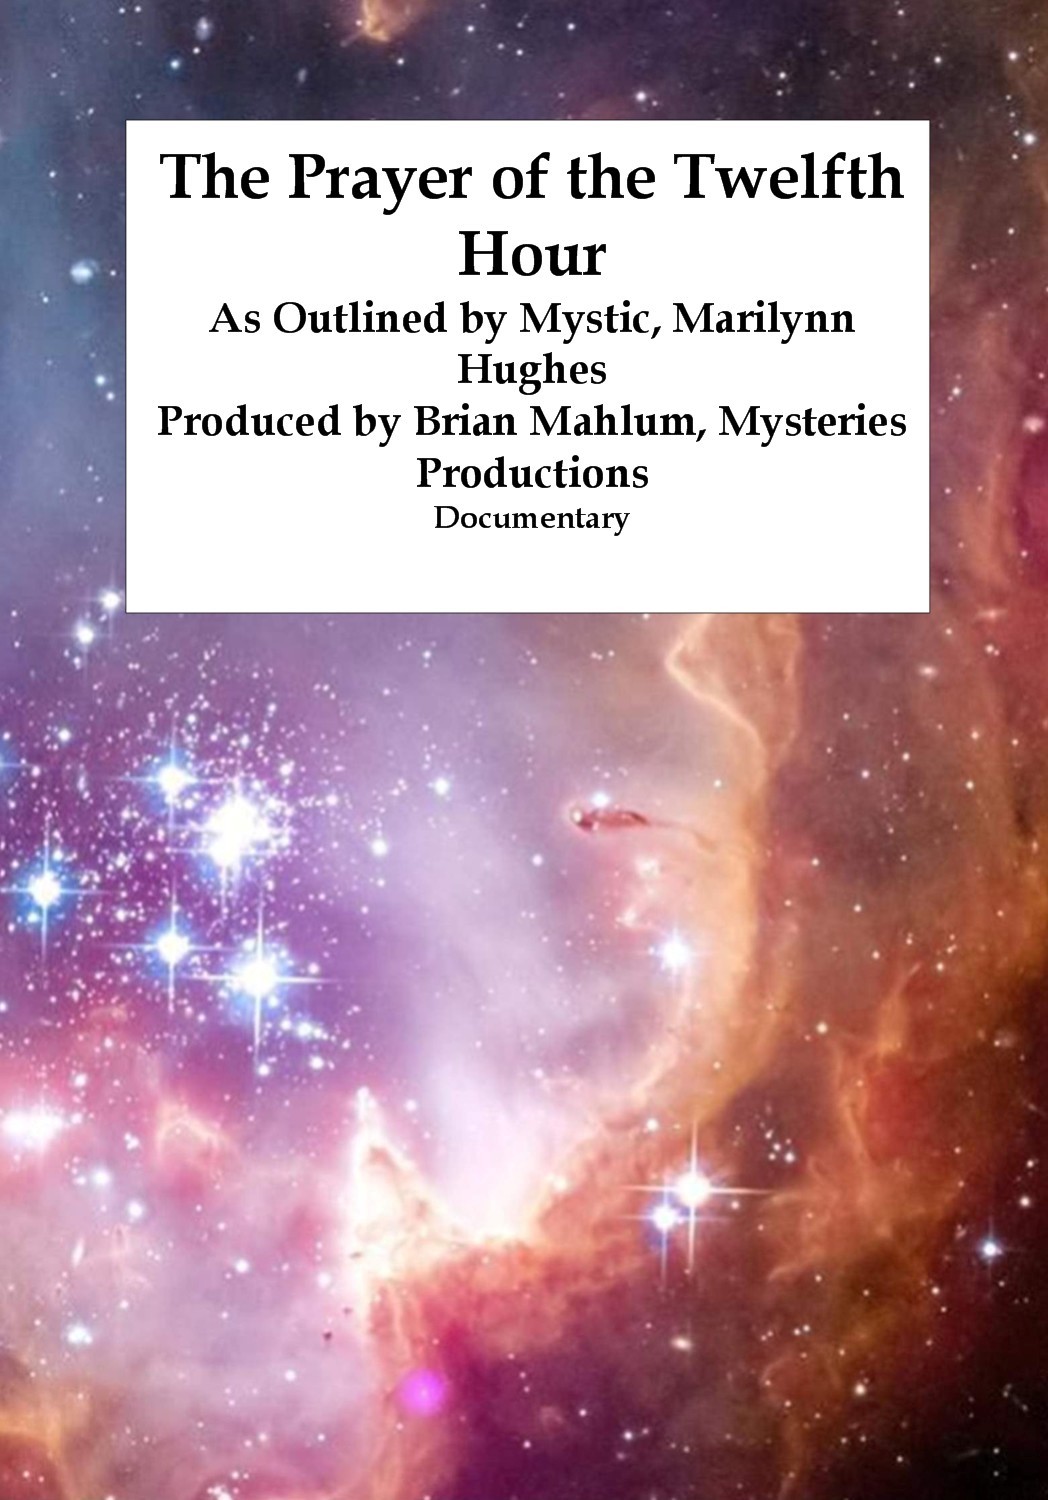 Documentary Film. As Outlined by Mystic, Marilynn Hughes of 'The Out-of-Body Travel Foundation.' Produced by Brian Mahlum, Mysteries Productions